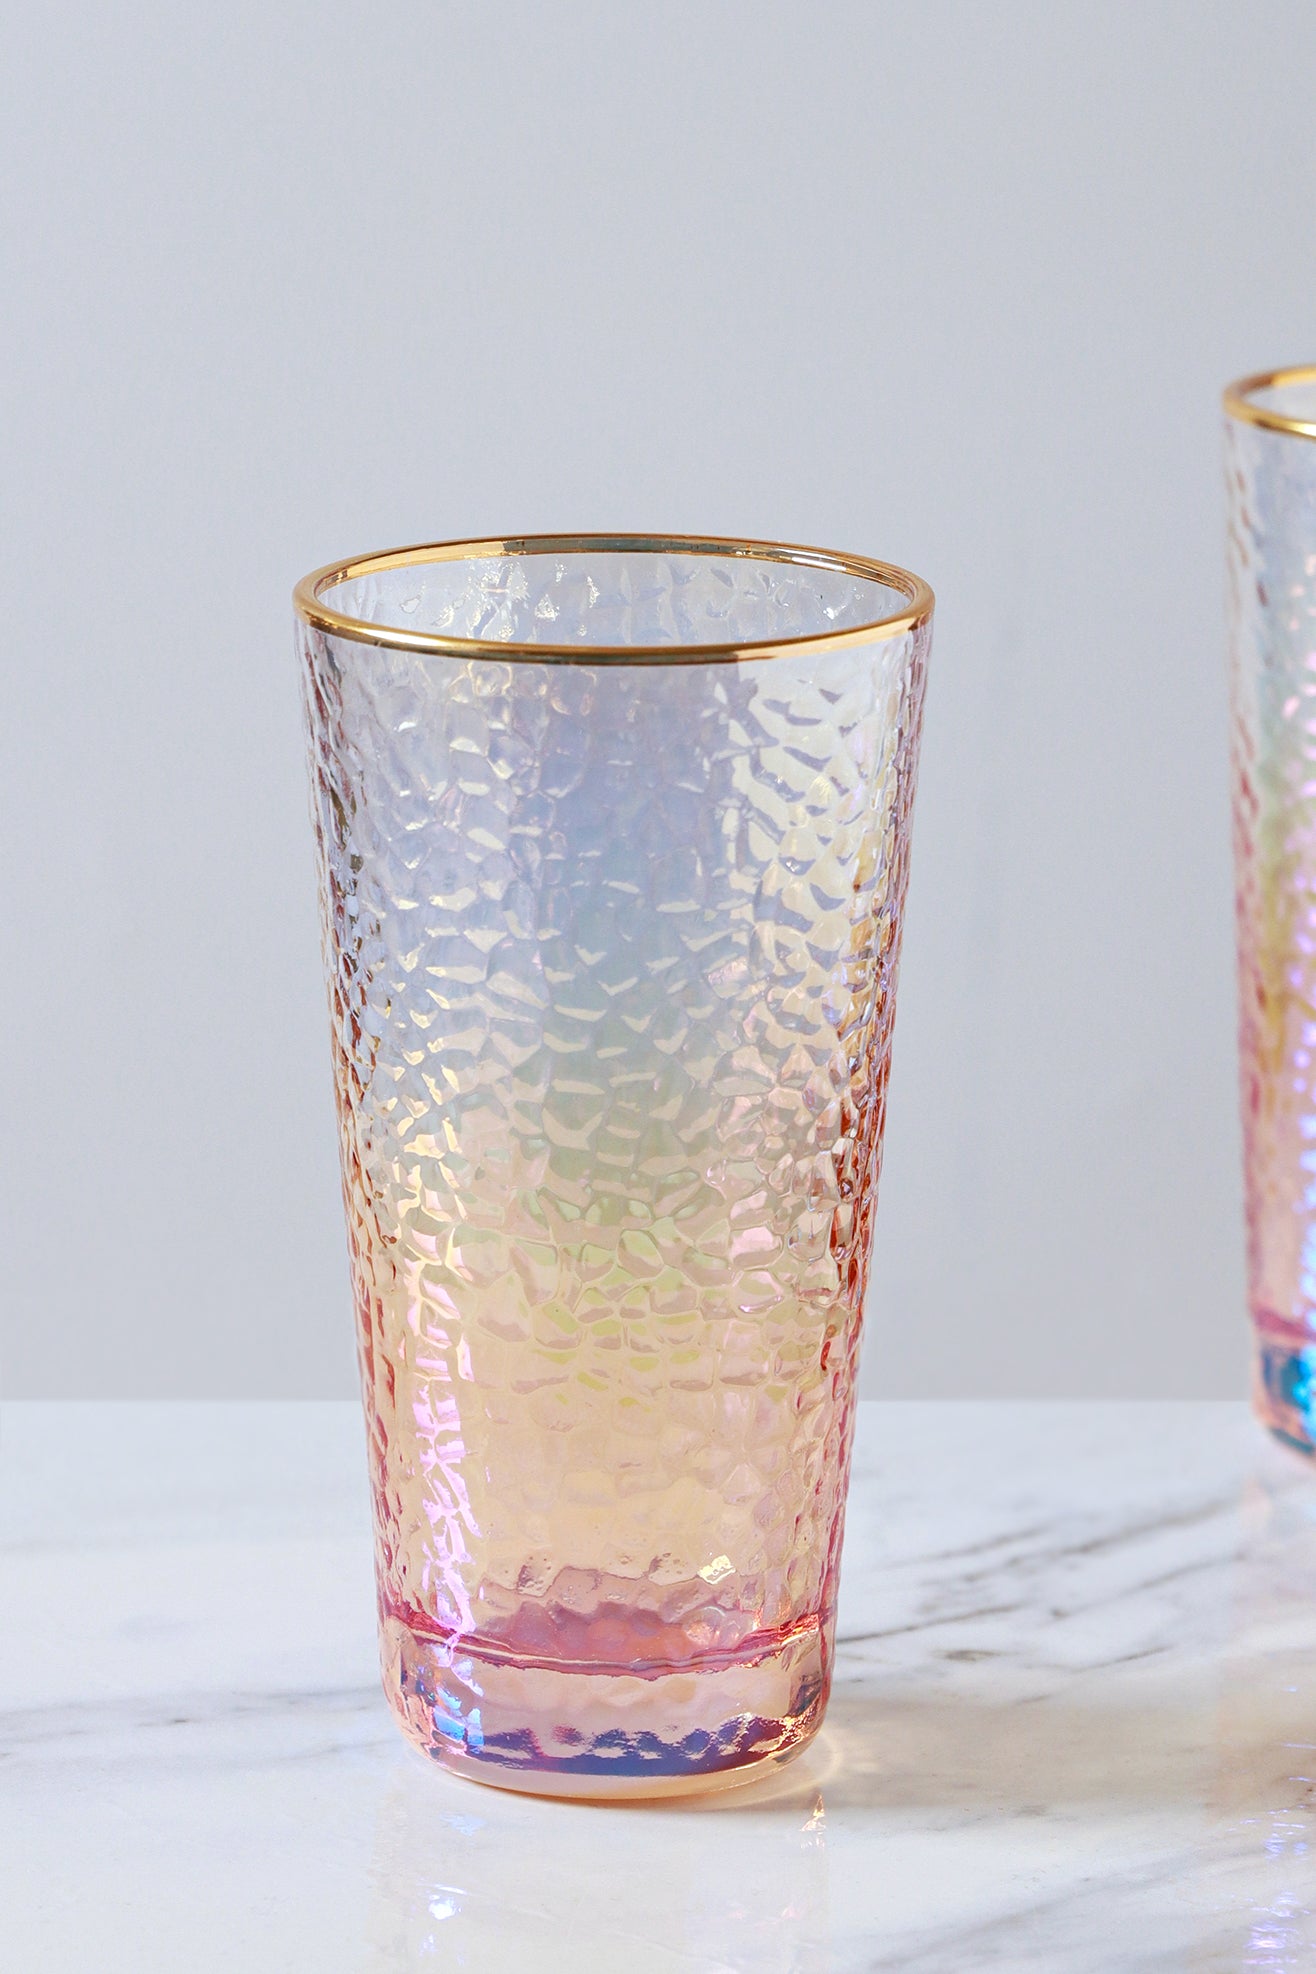 Set of 4 Lustre Pearl Hammered Textured Tumbler Drinking Glasses